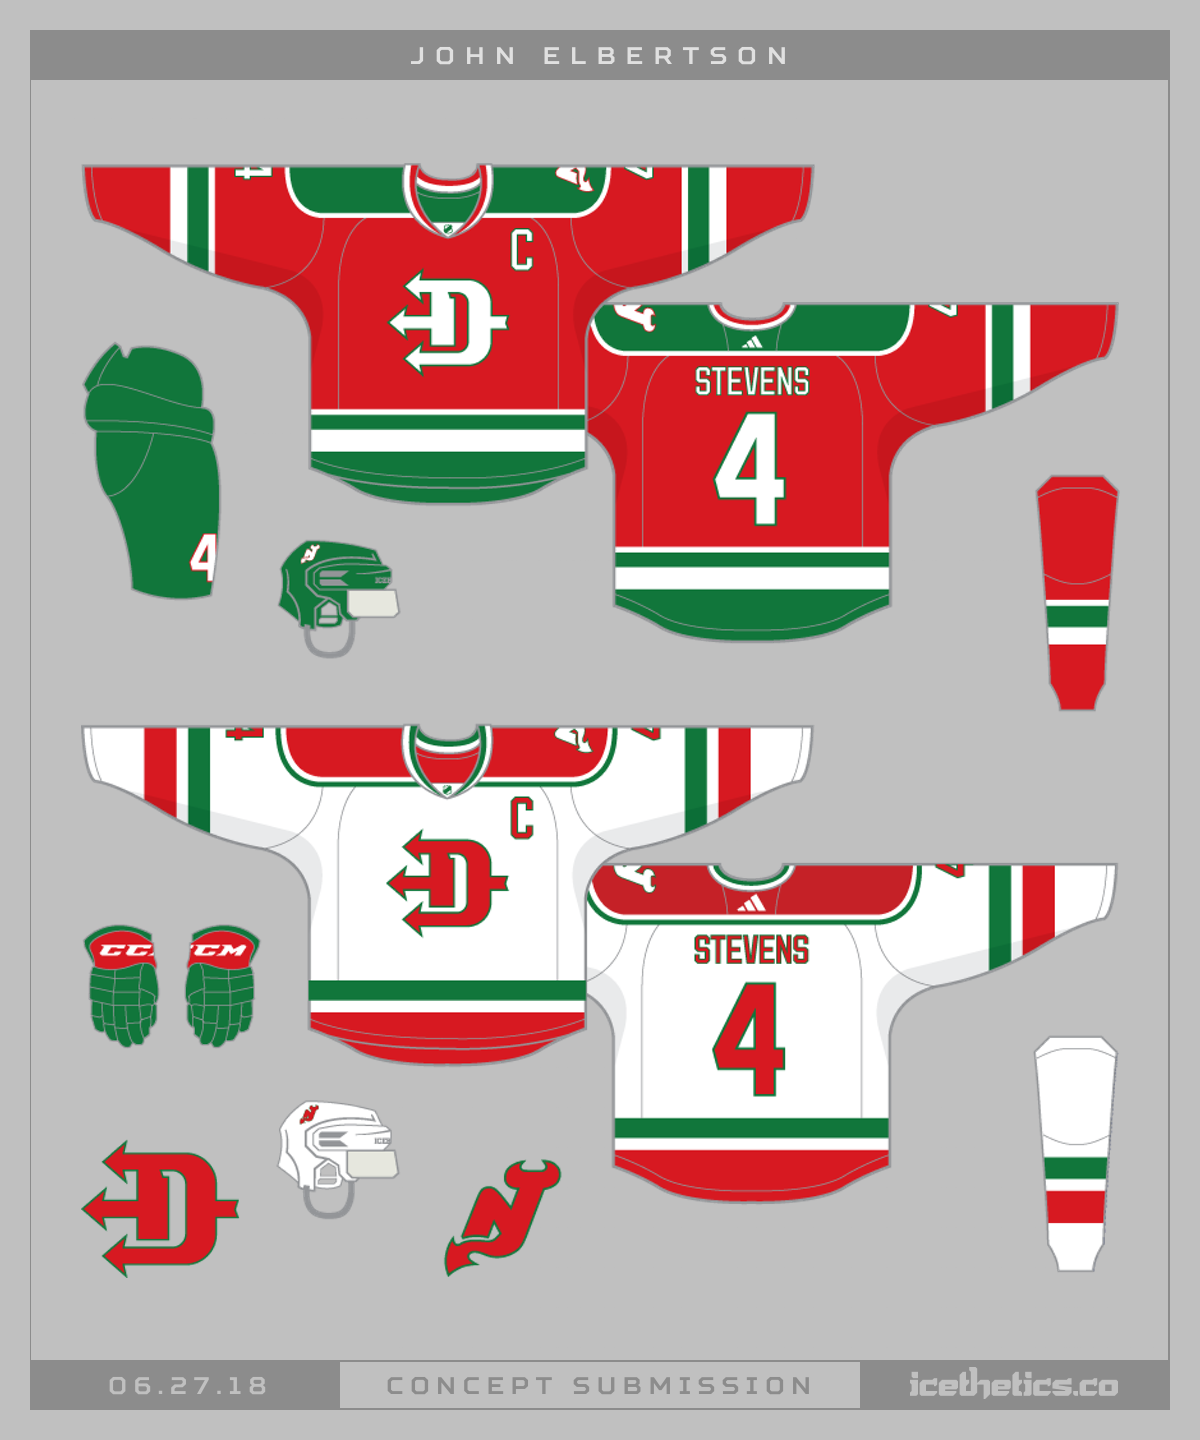 Lucas Daitchman on X: A #NJDevils concept blending the Devils' current  bold jersey striping pattern with their original design, complete with a  matching bolder logo.  / X